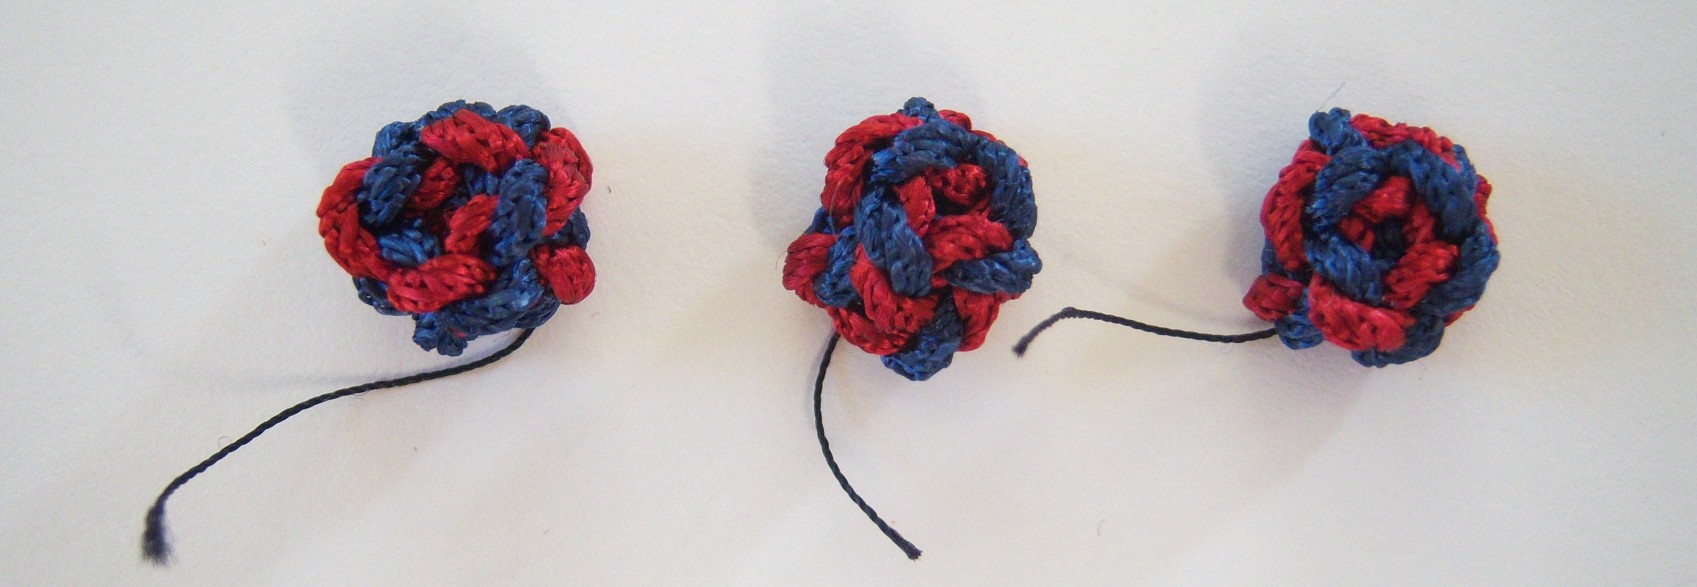 Chinese Knot Button Rose/Lt Blue/Black